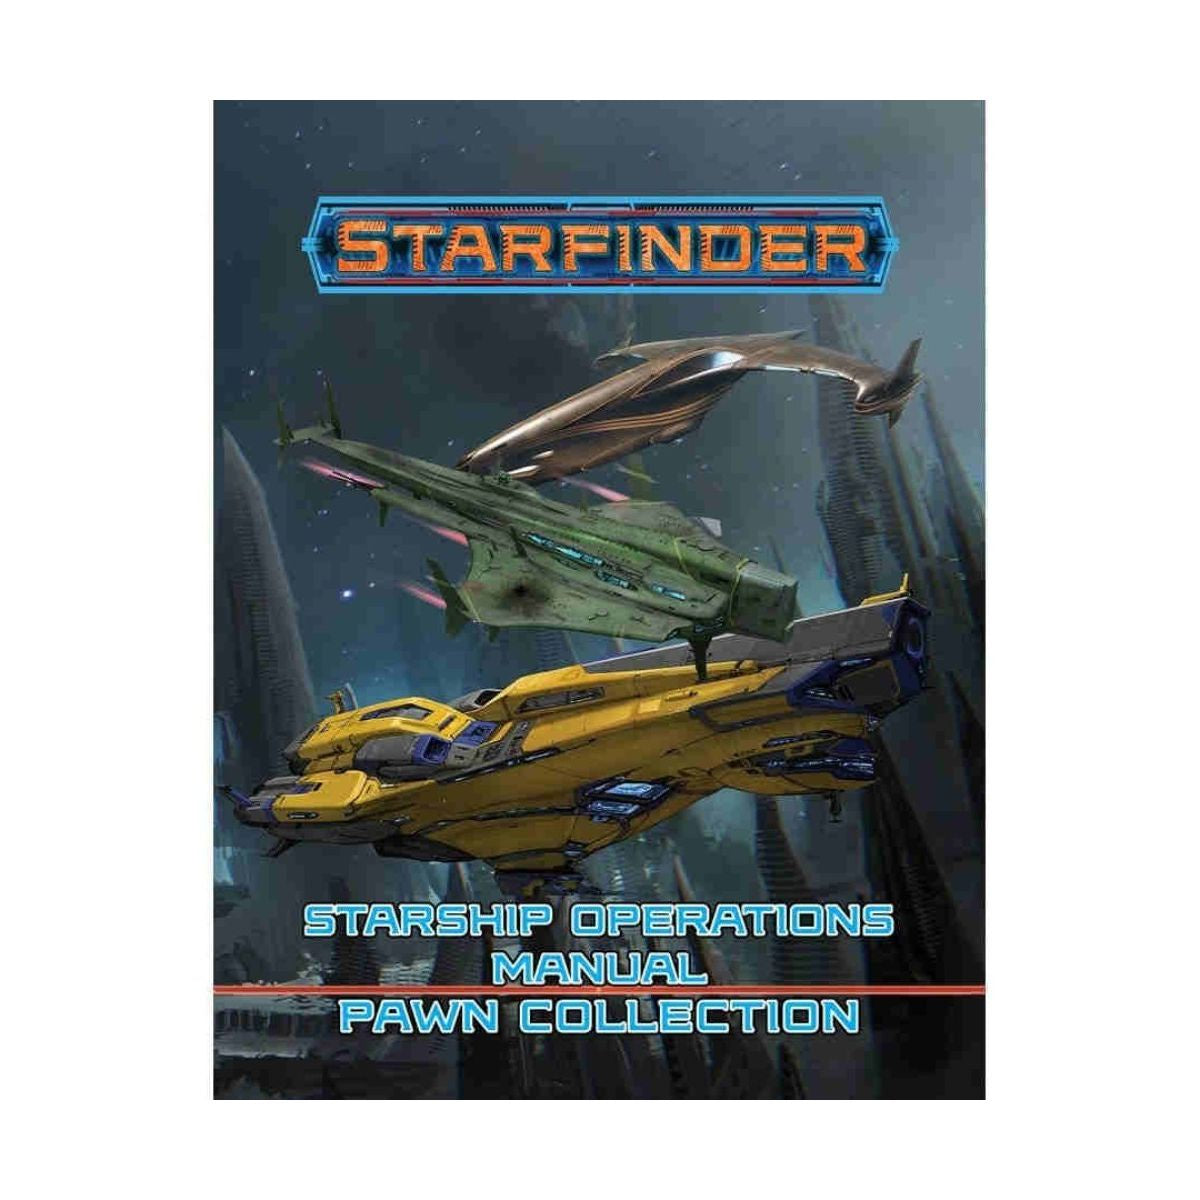 Starfinder RPG - Starship Operations Manual Pawn Collection